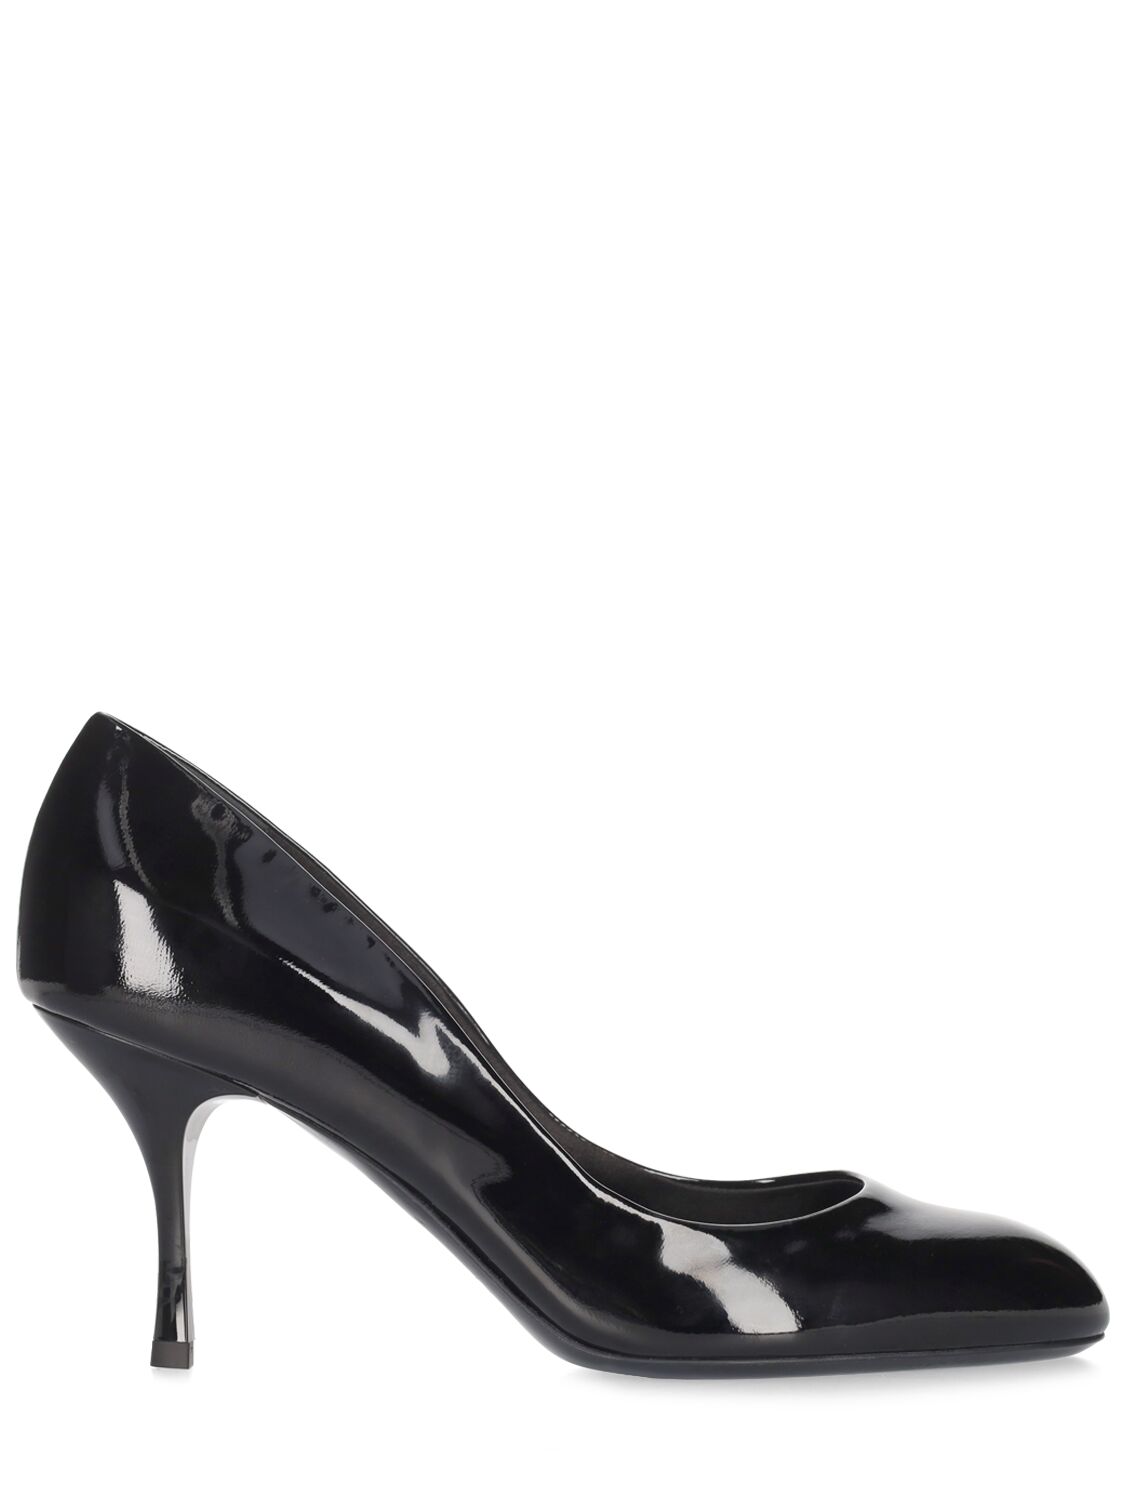 Image of 80mm Marylin Shiny Patent Leather Pumps